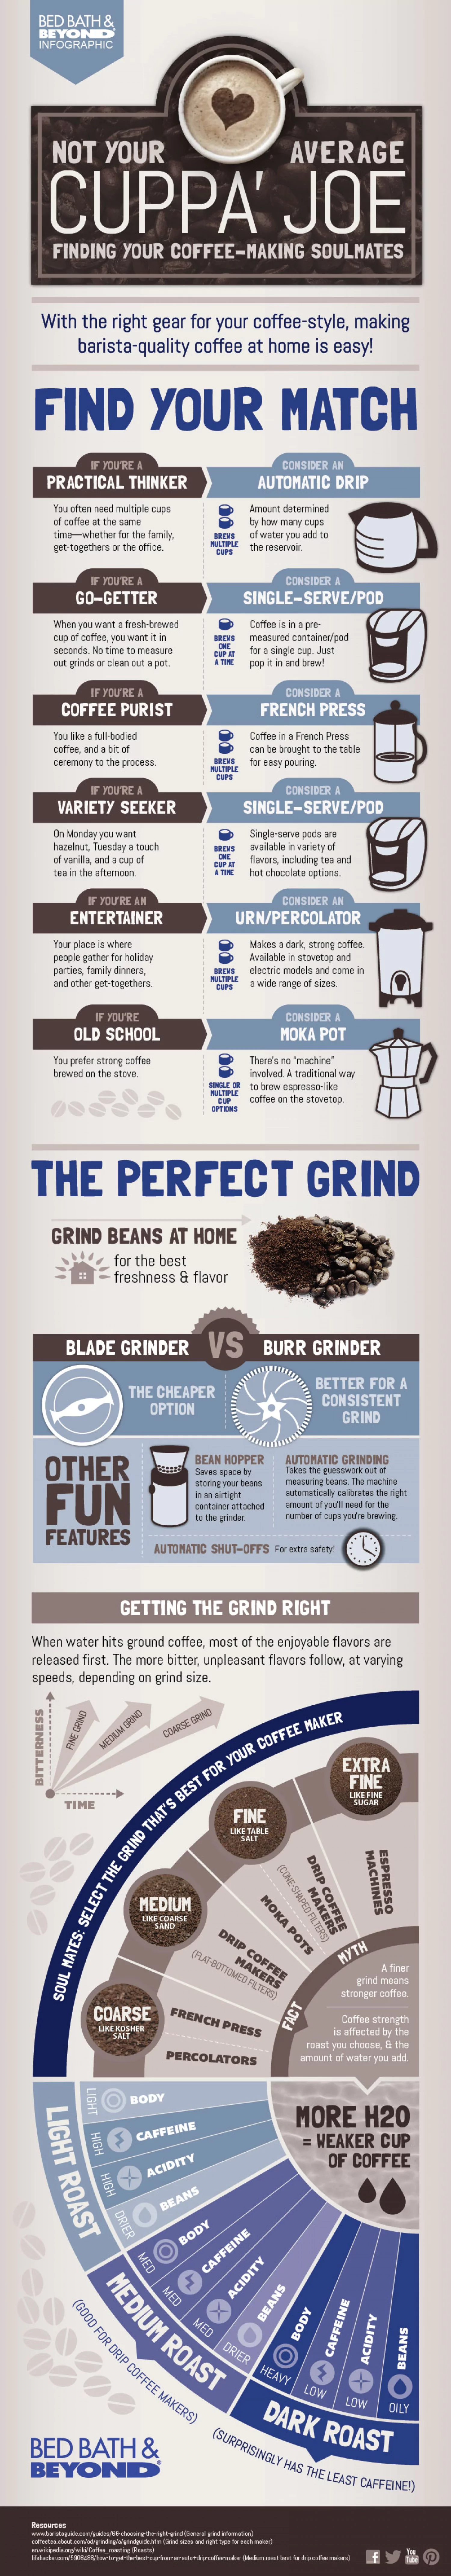 Find Your Perfect Coffee Match